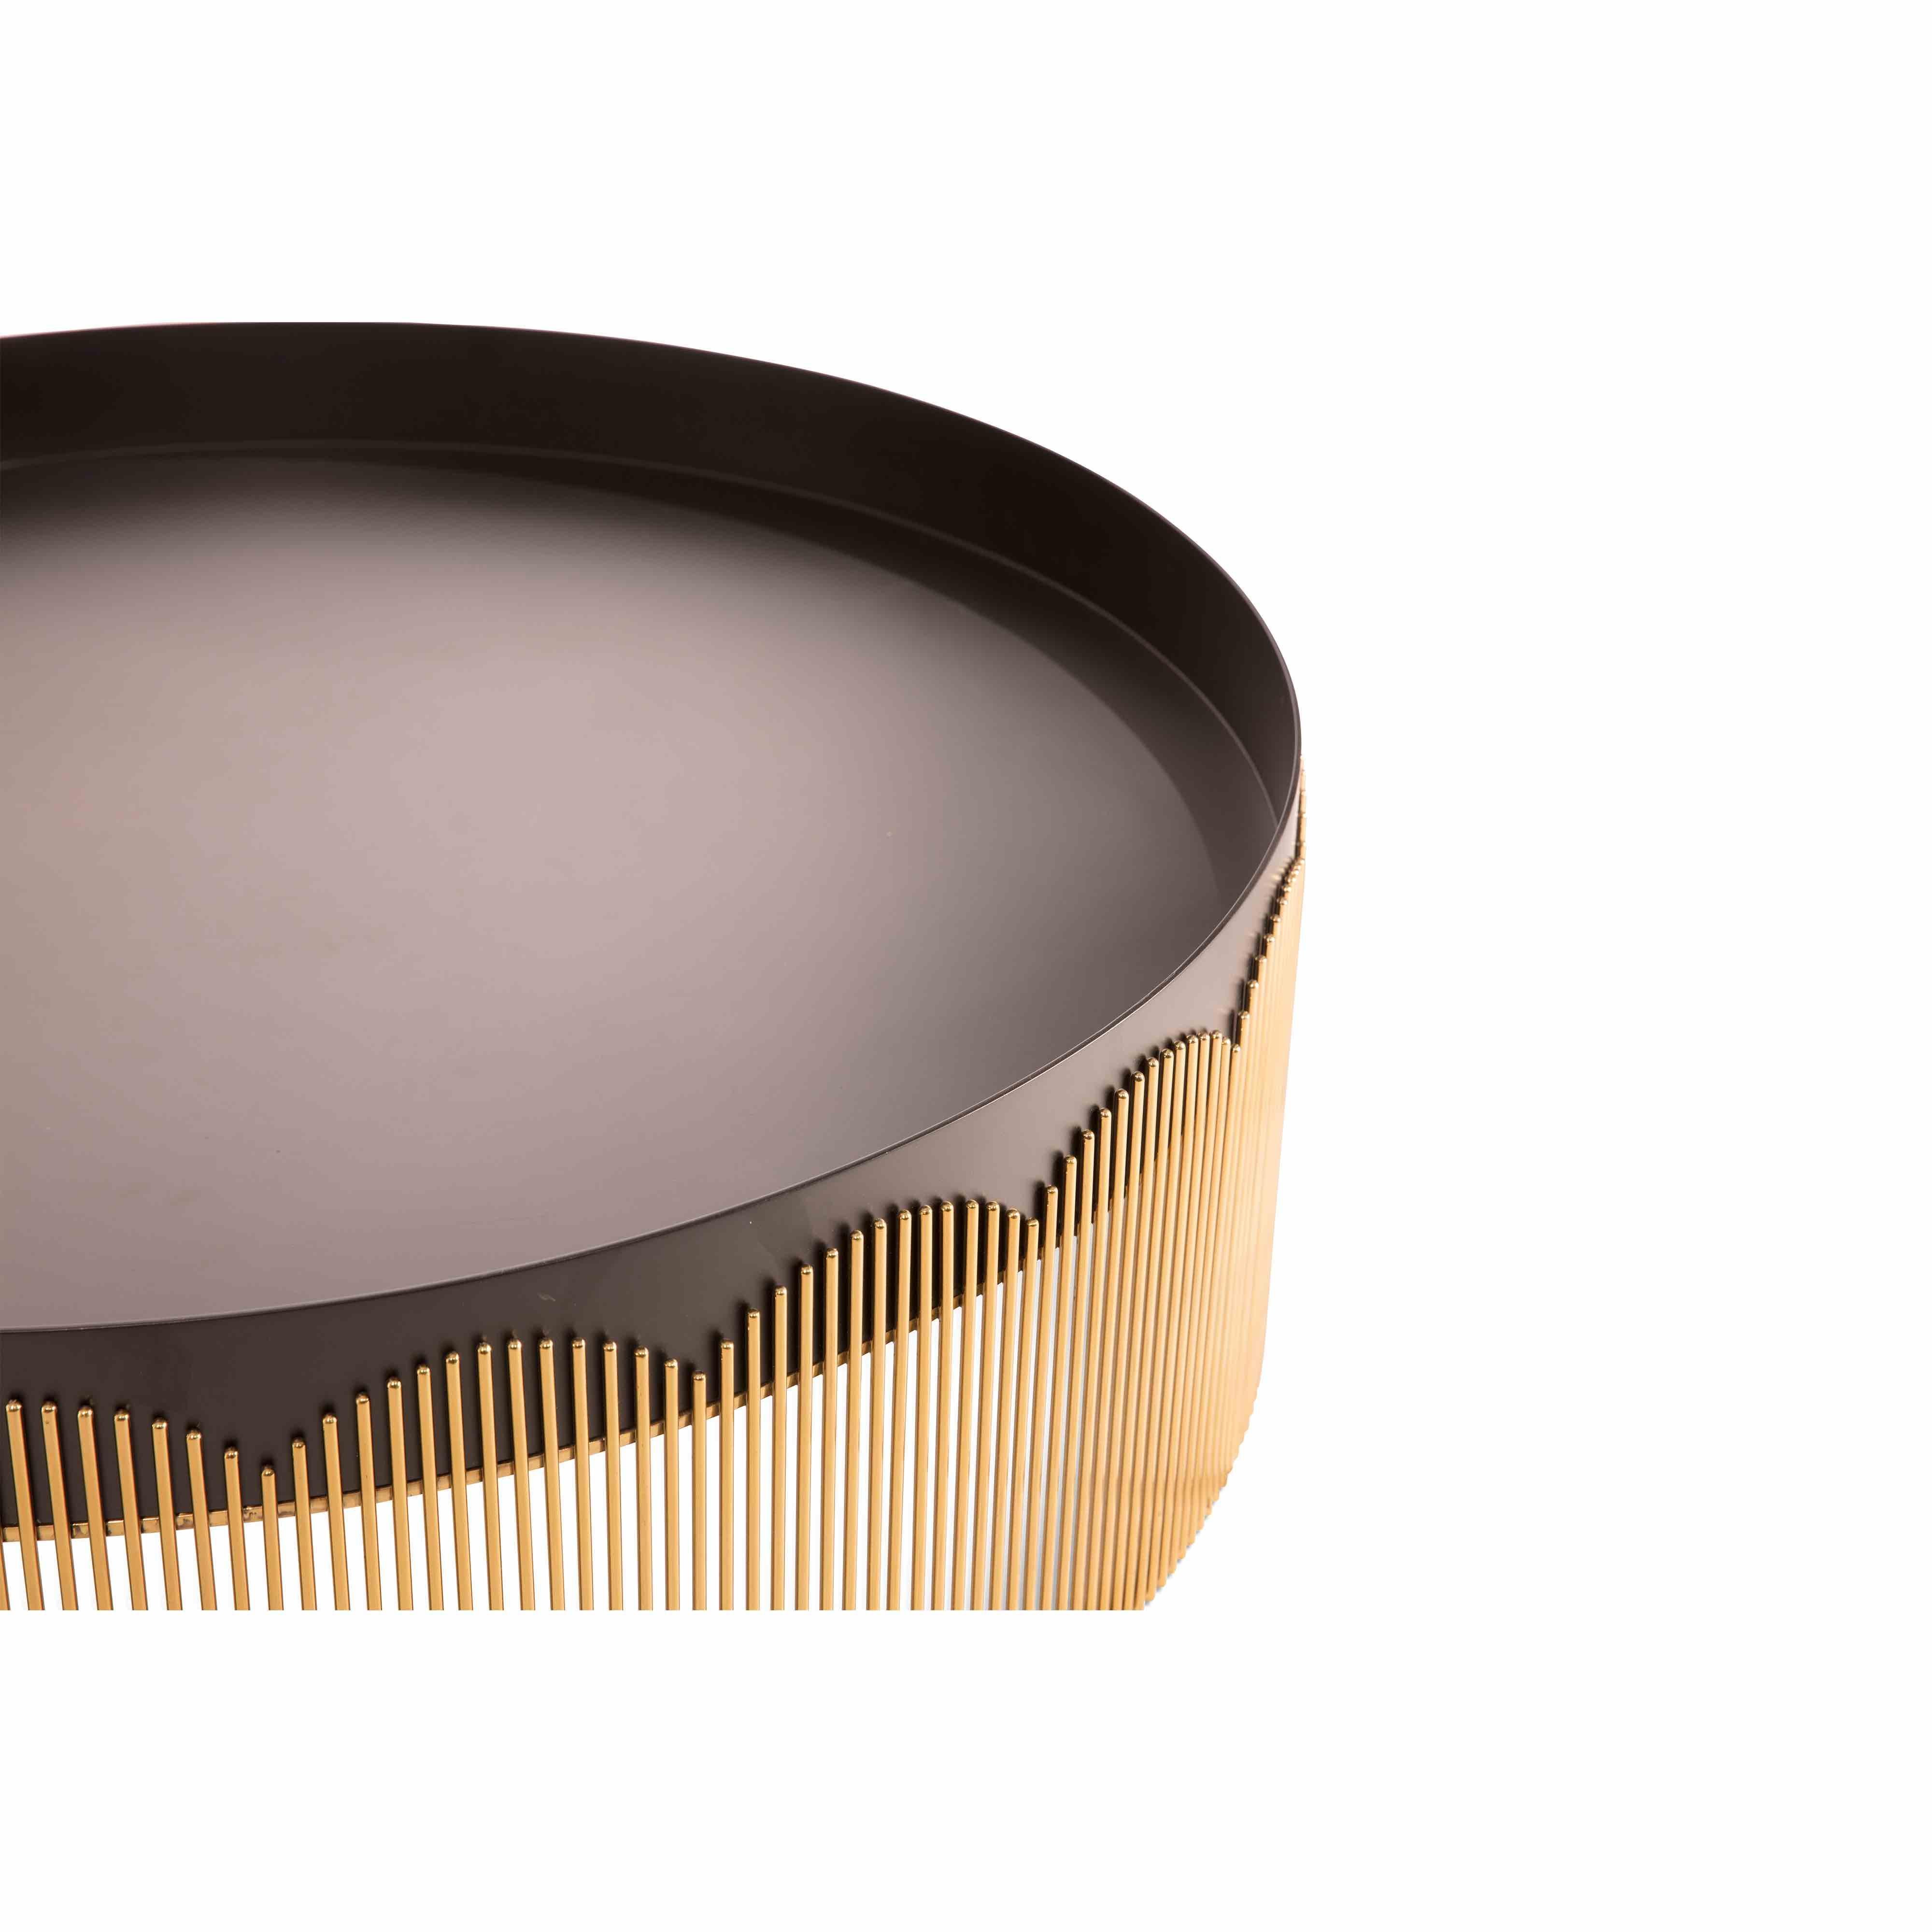 Strings gold and black metal coffee table by Nika Zupanc, is elegant in its lace-like gold, steel base with matt black tray top.

The word strings evokes a vision of lightness in our minds. Be it the strings of a musical instrument or textile